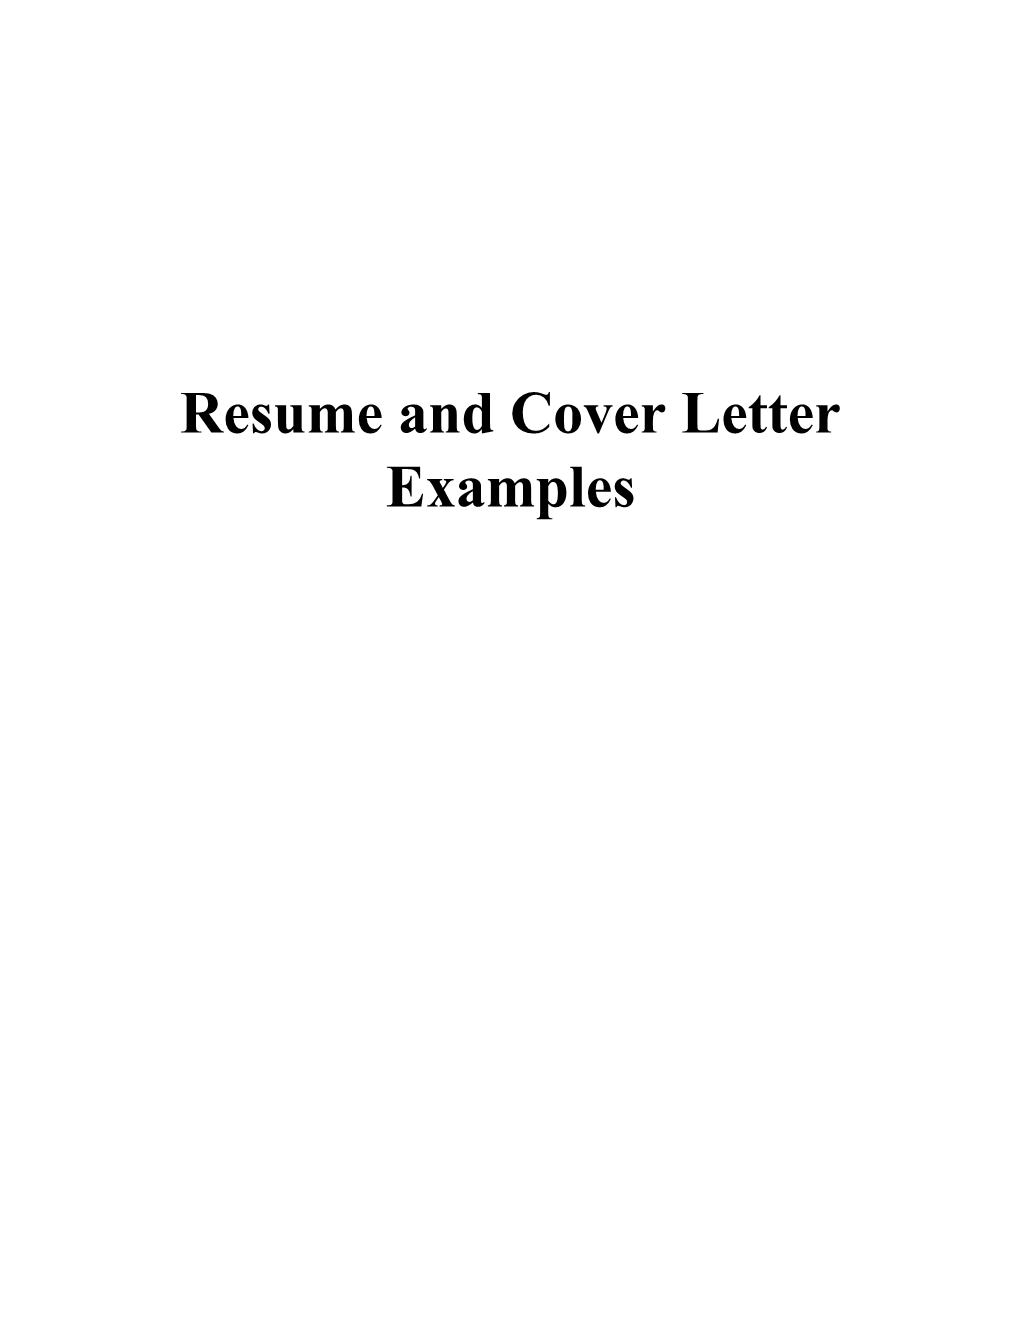 Resume and Cover Letter Examples